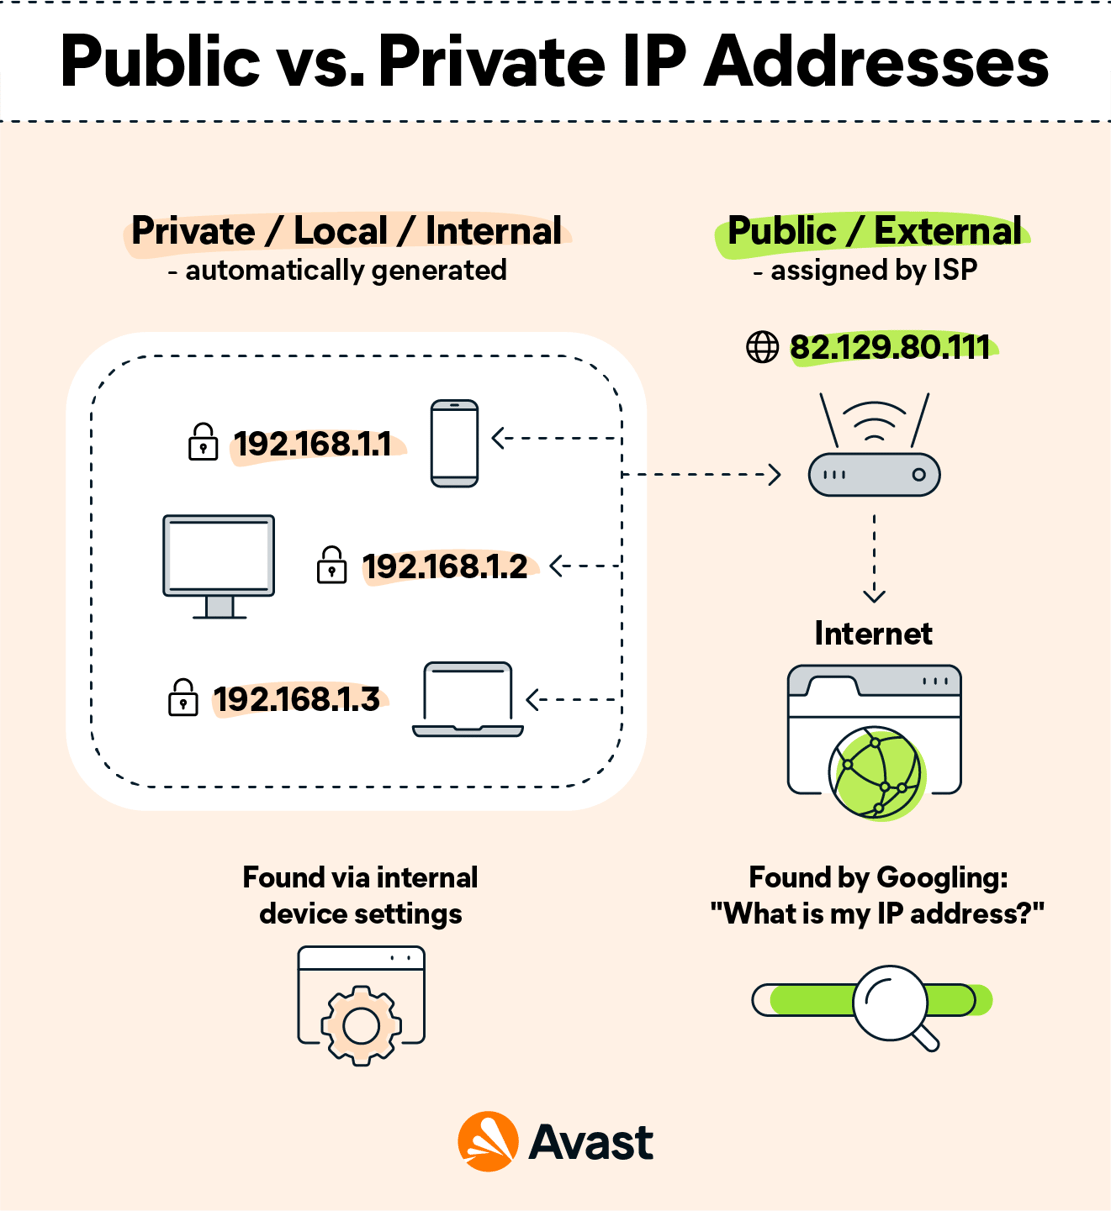 What if my IP address is public?